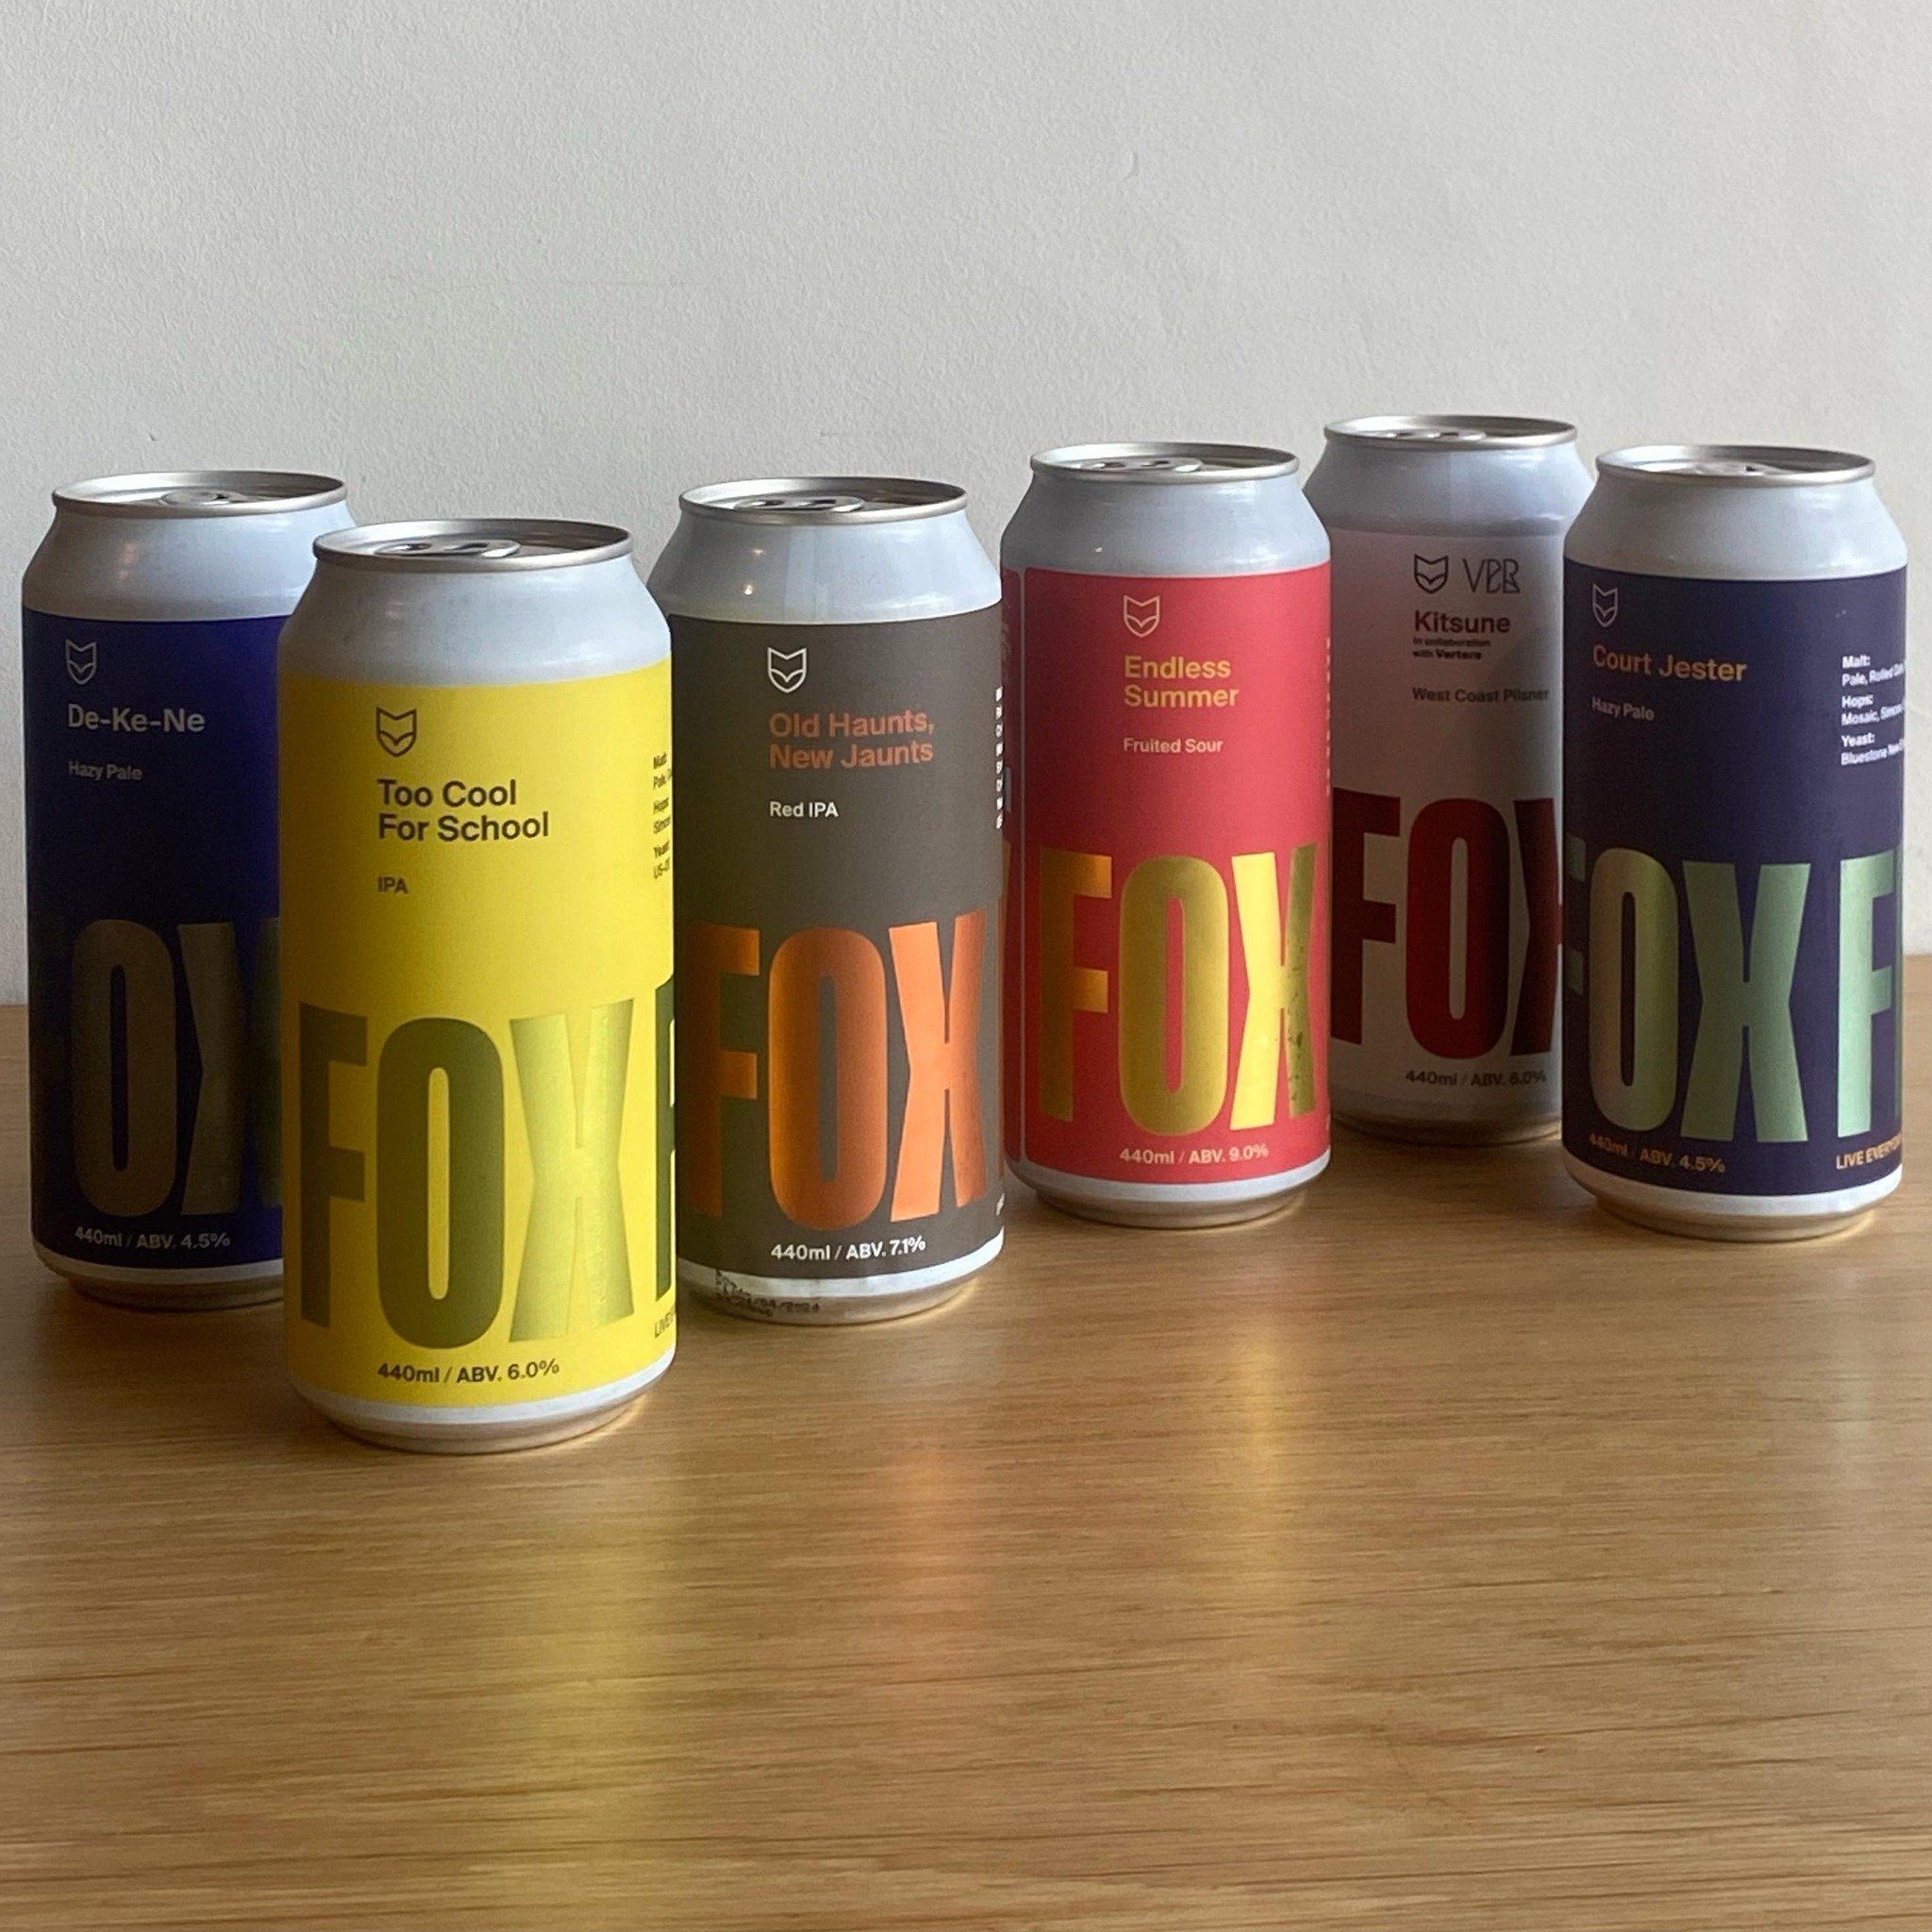 Life is full of options&hellip;

As a suggestion today looks pretty good for drinking cold beer, 6 limiteds available from our friends at @foxfridaybrewery 

You could make a day of it?